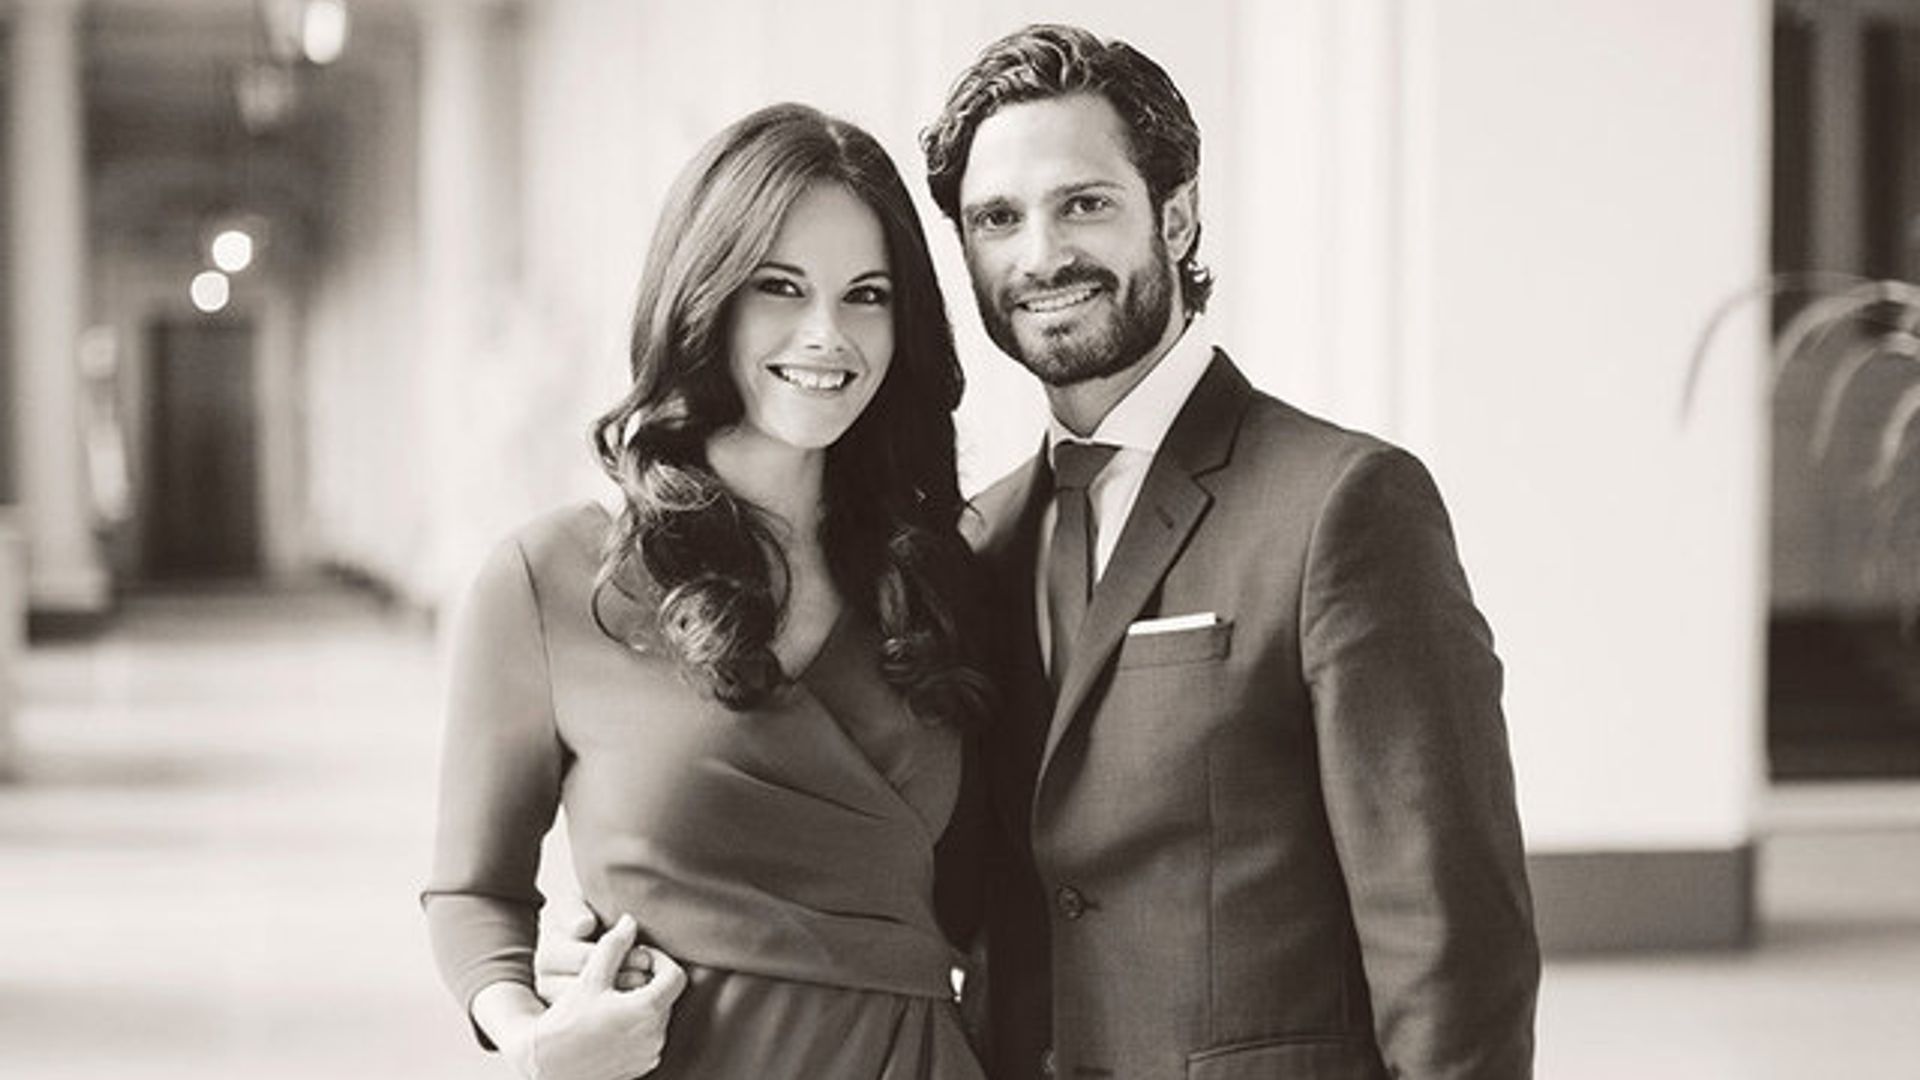 Sweden's Prince Carl Philip and Sofia Hellqvist announce date of royal wedding